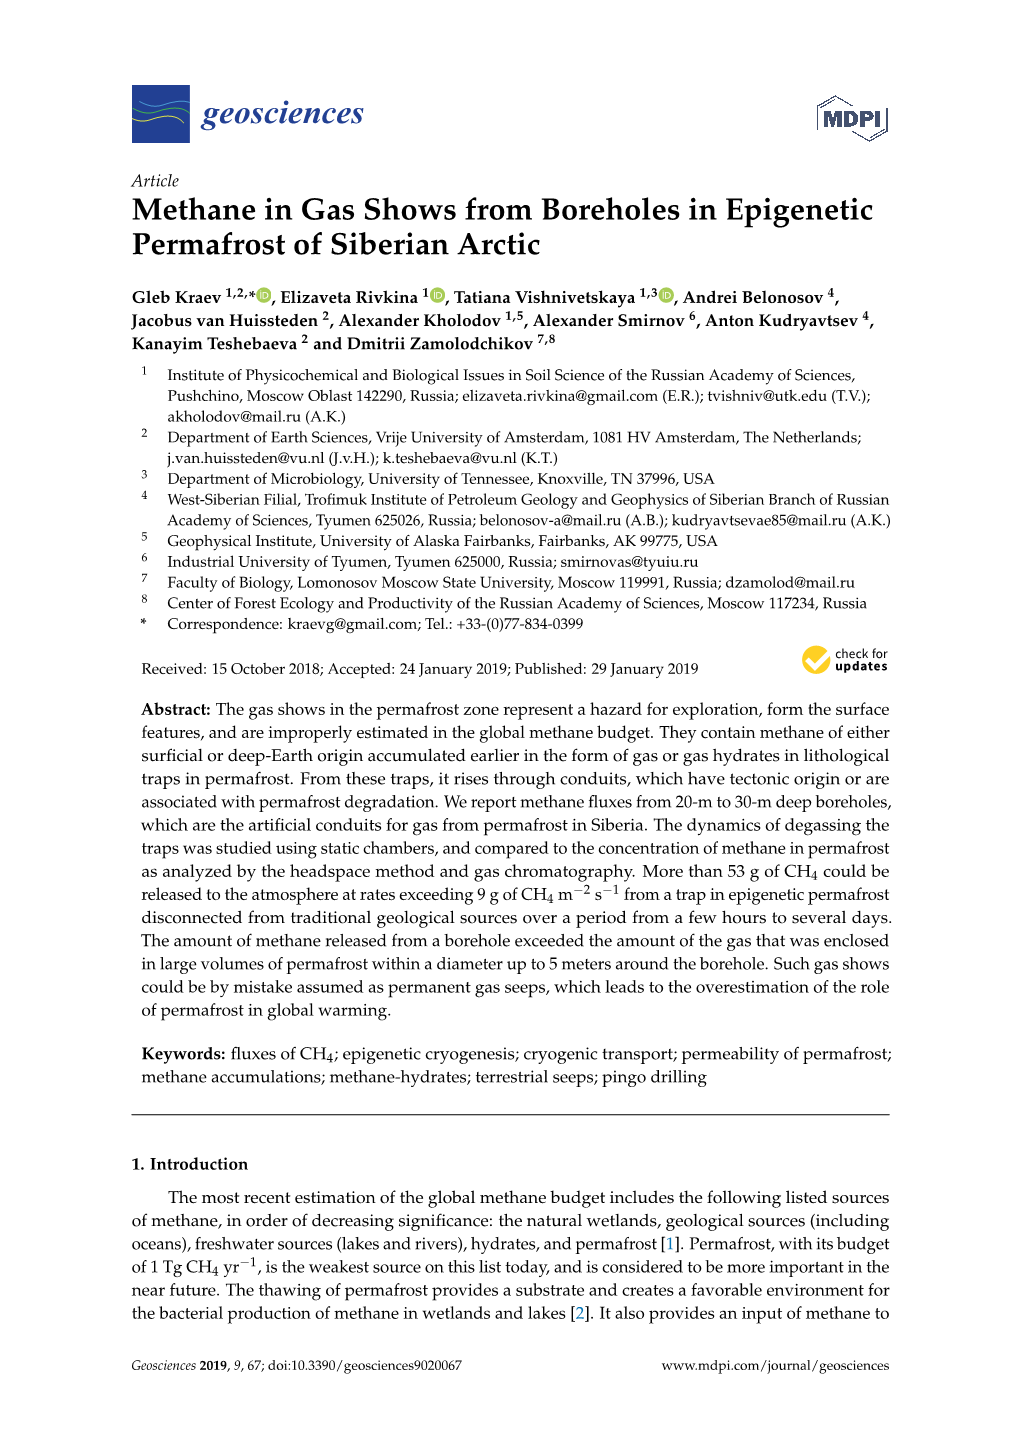 Methane in Gas Shows from Boreholes in Epigenetic Permafrost of Siberian Arctic